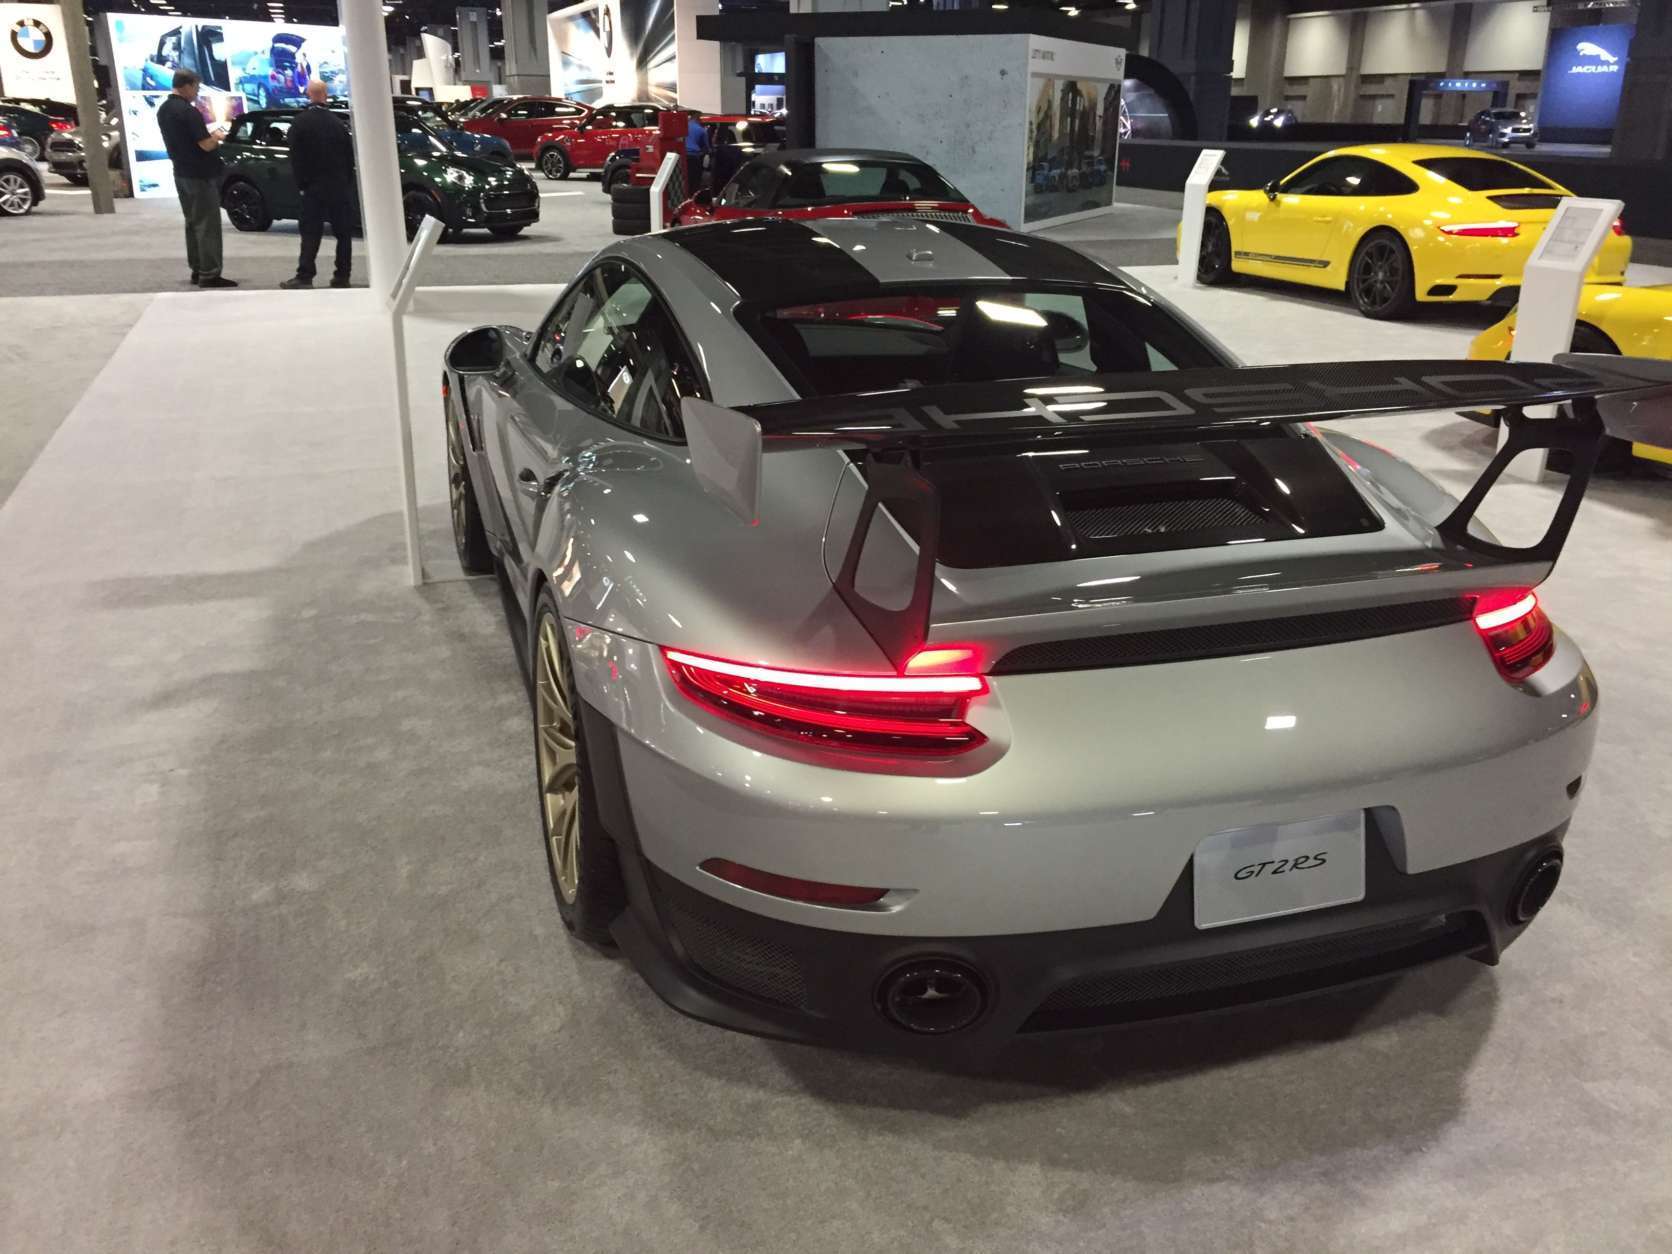 The $344,000 Porsche gt2rs goes 0 to 60 in less than two seconds. Pictured at the 2018 Washington Auto Show.
 (WTOP/John Domen)